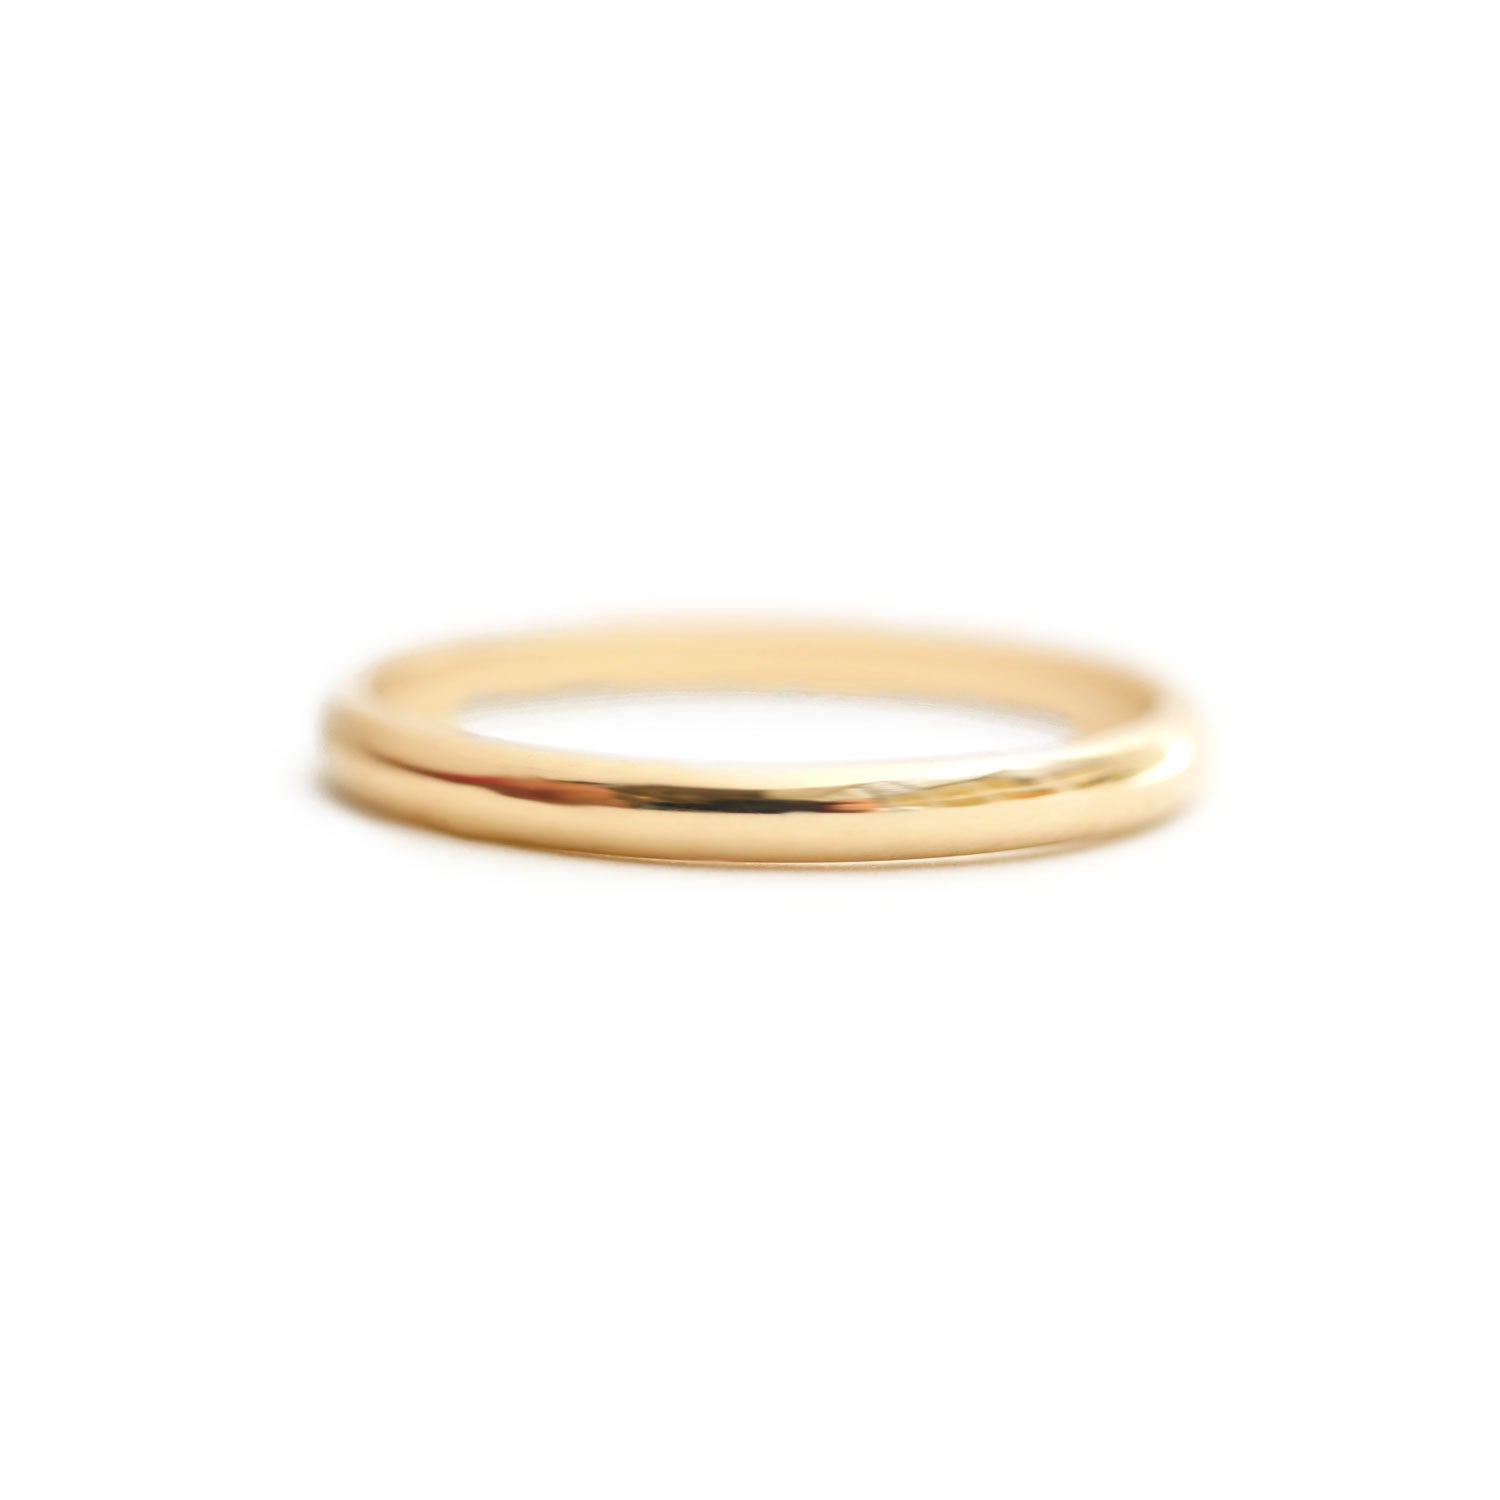 2mm Gold Delicate Wedding Band Ring